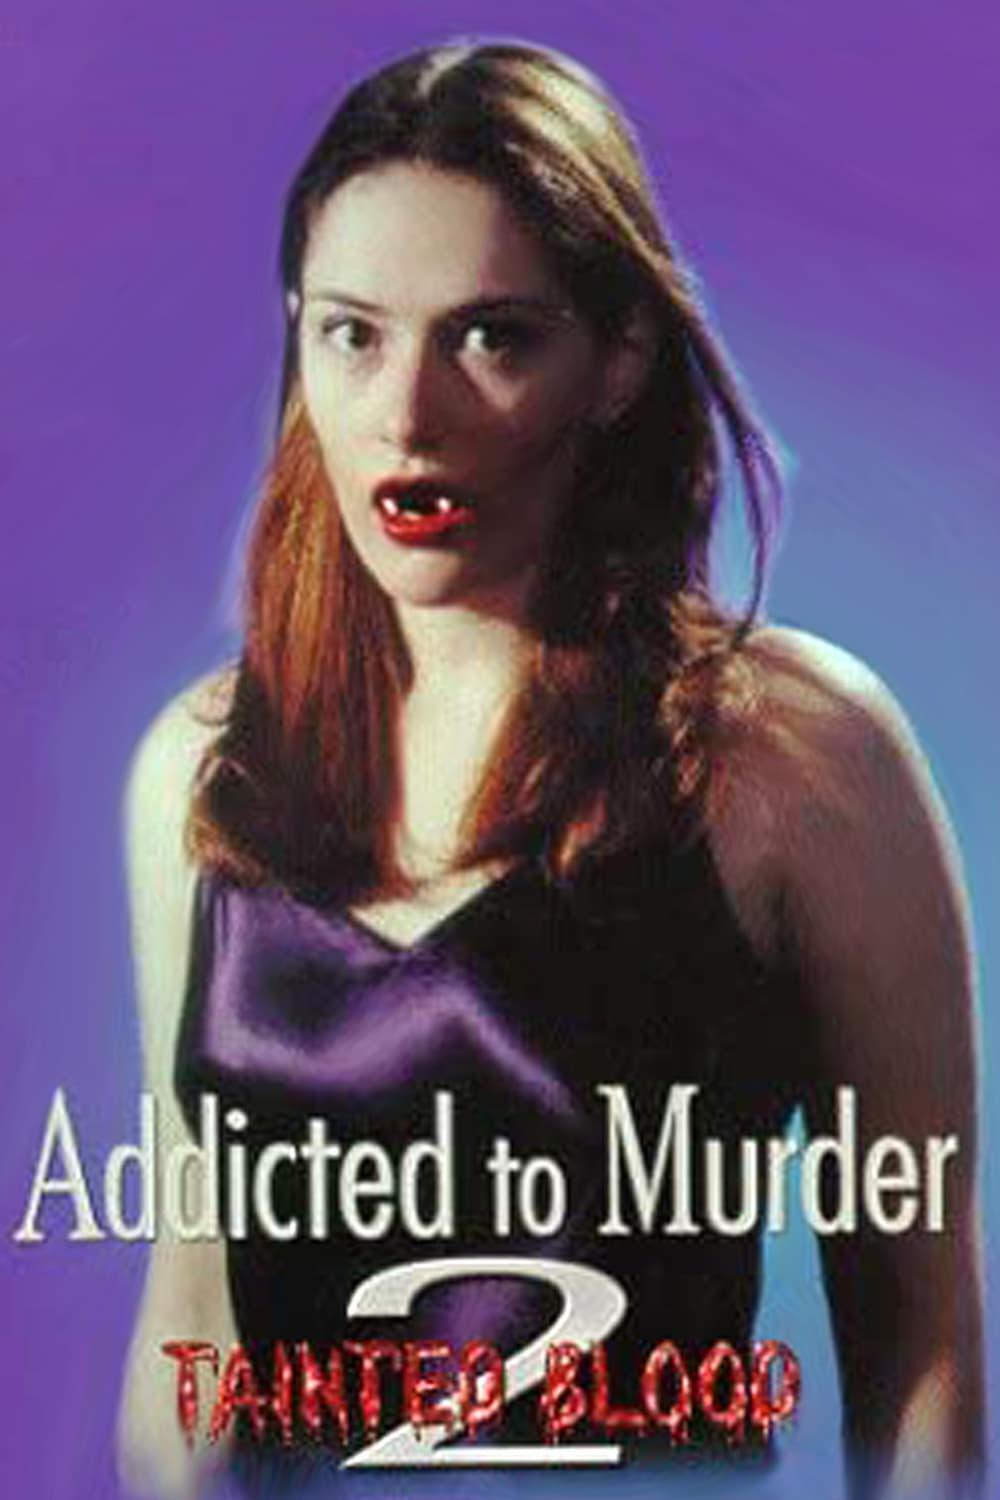 Addicted to Murder 2: Tainted Blood poster